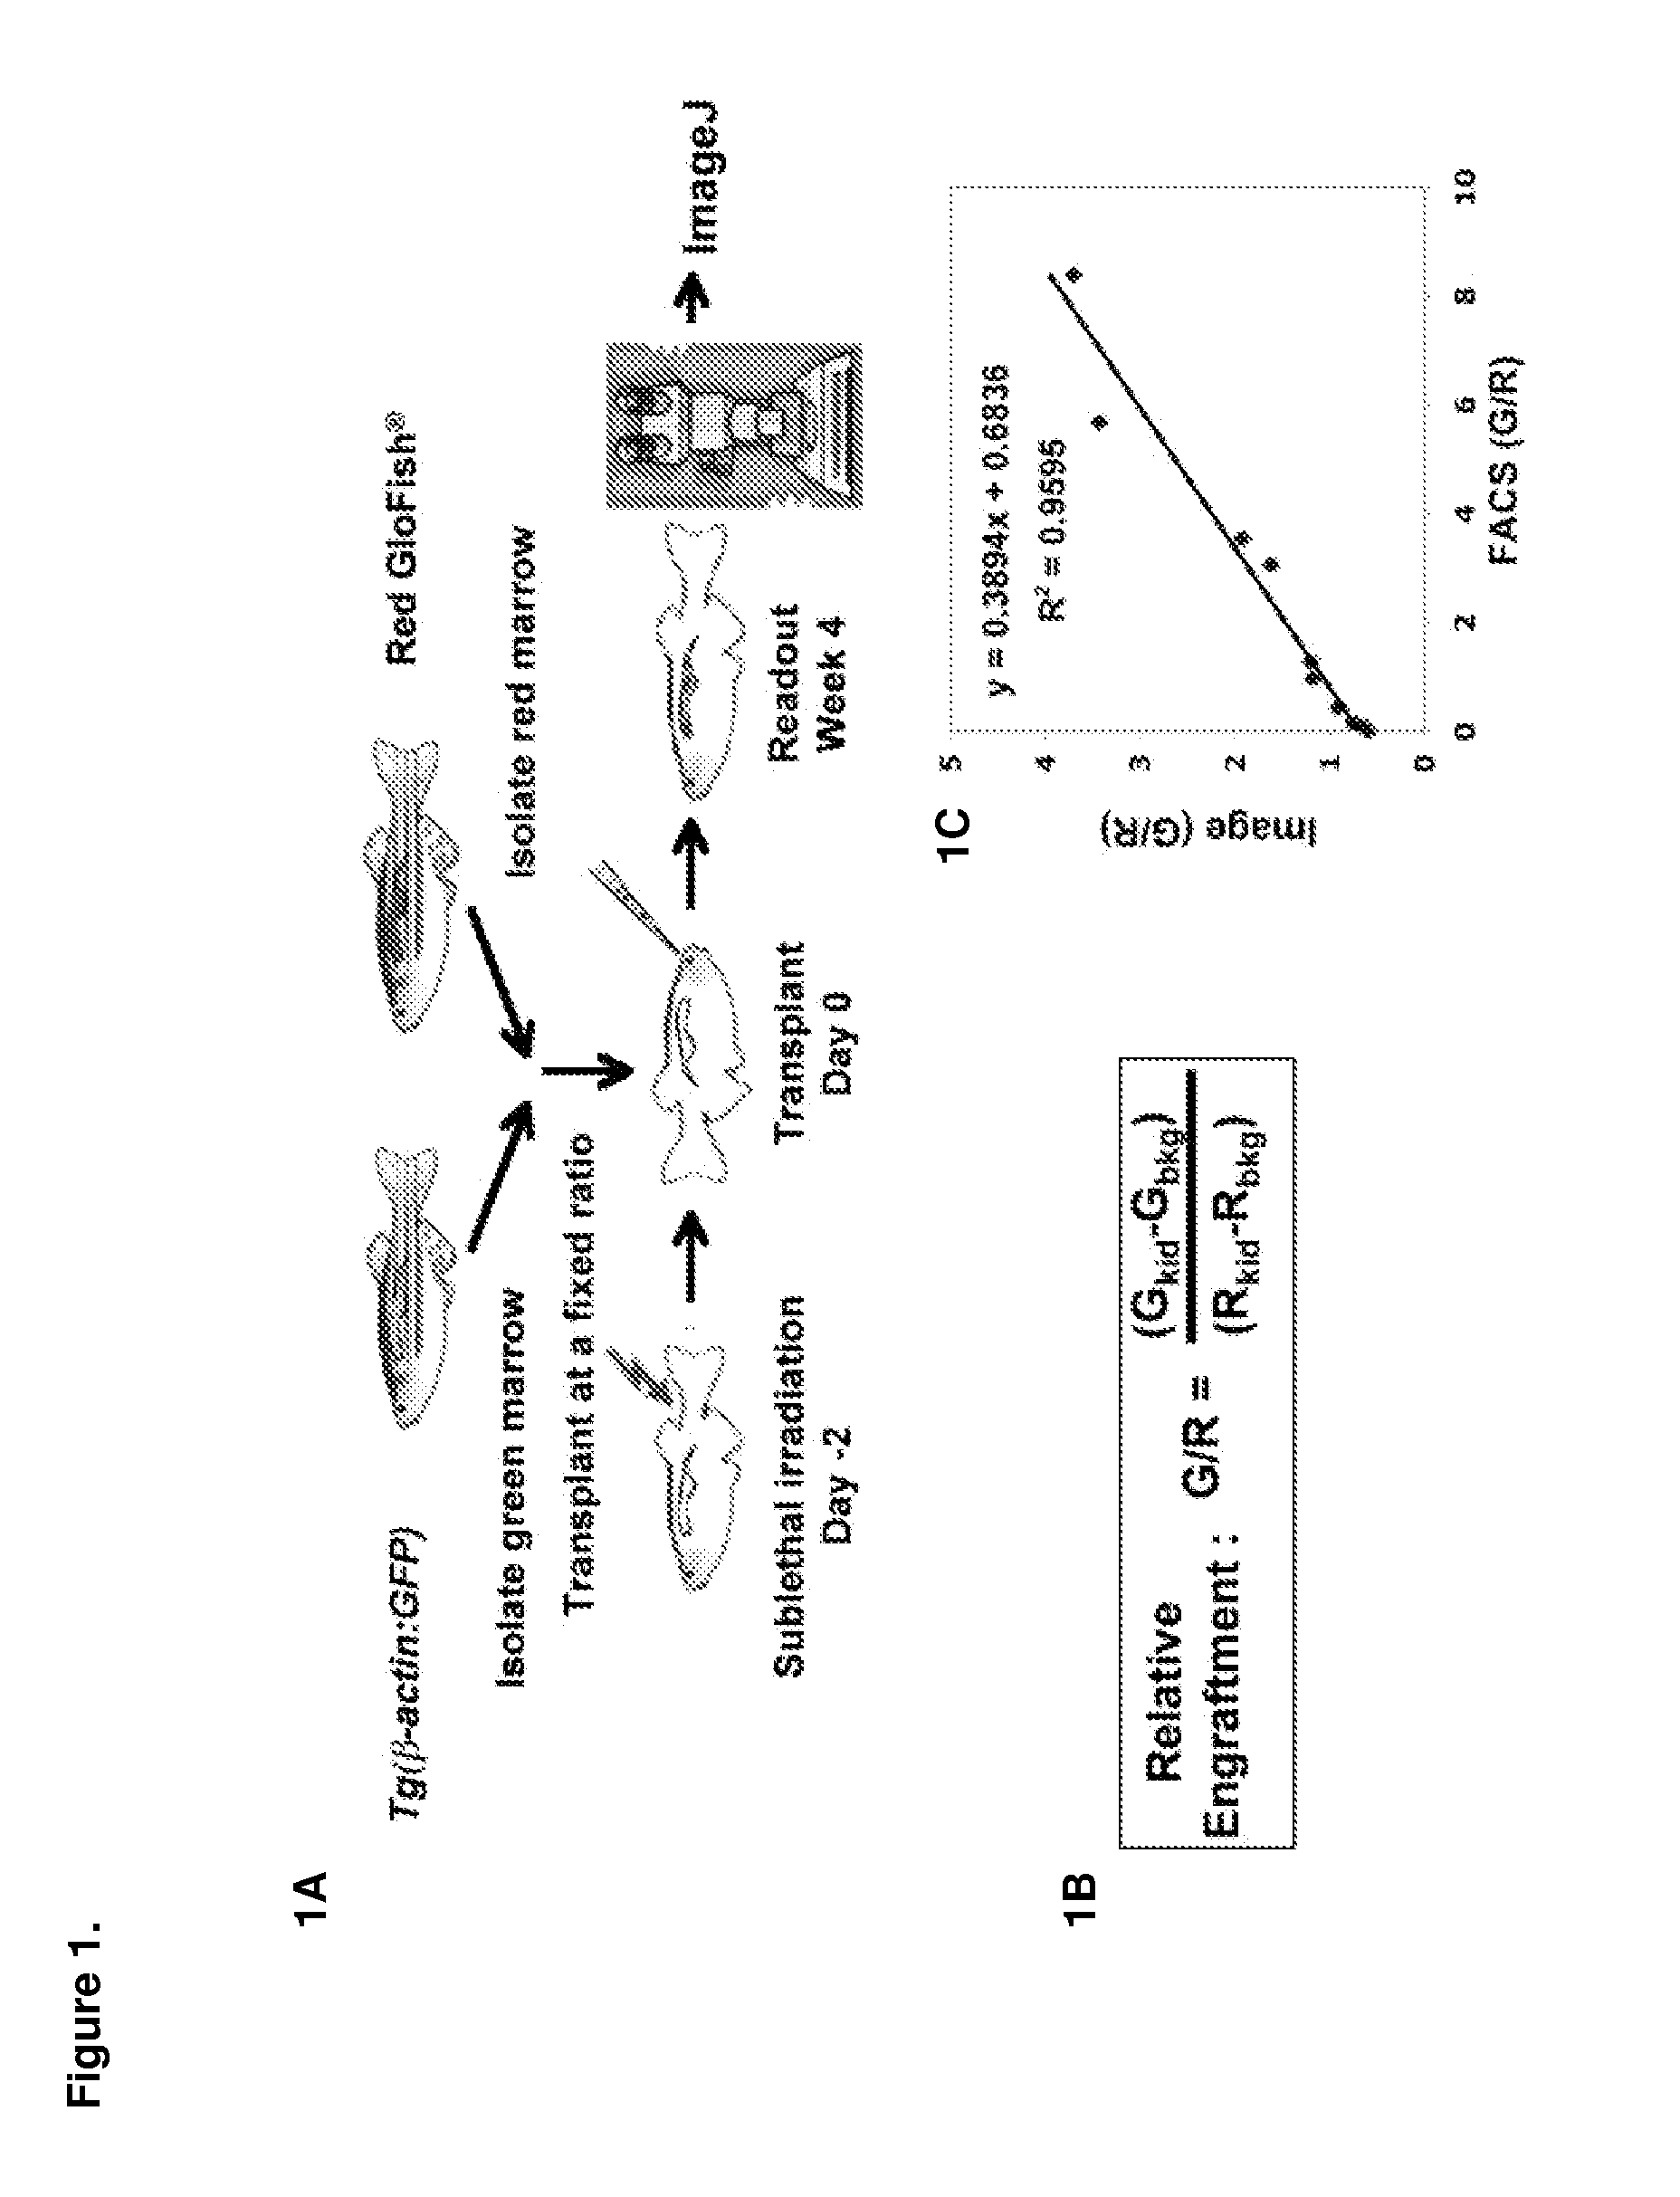 Methods for enhancing hematopoietic stem/progenitor cell engraftment